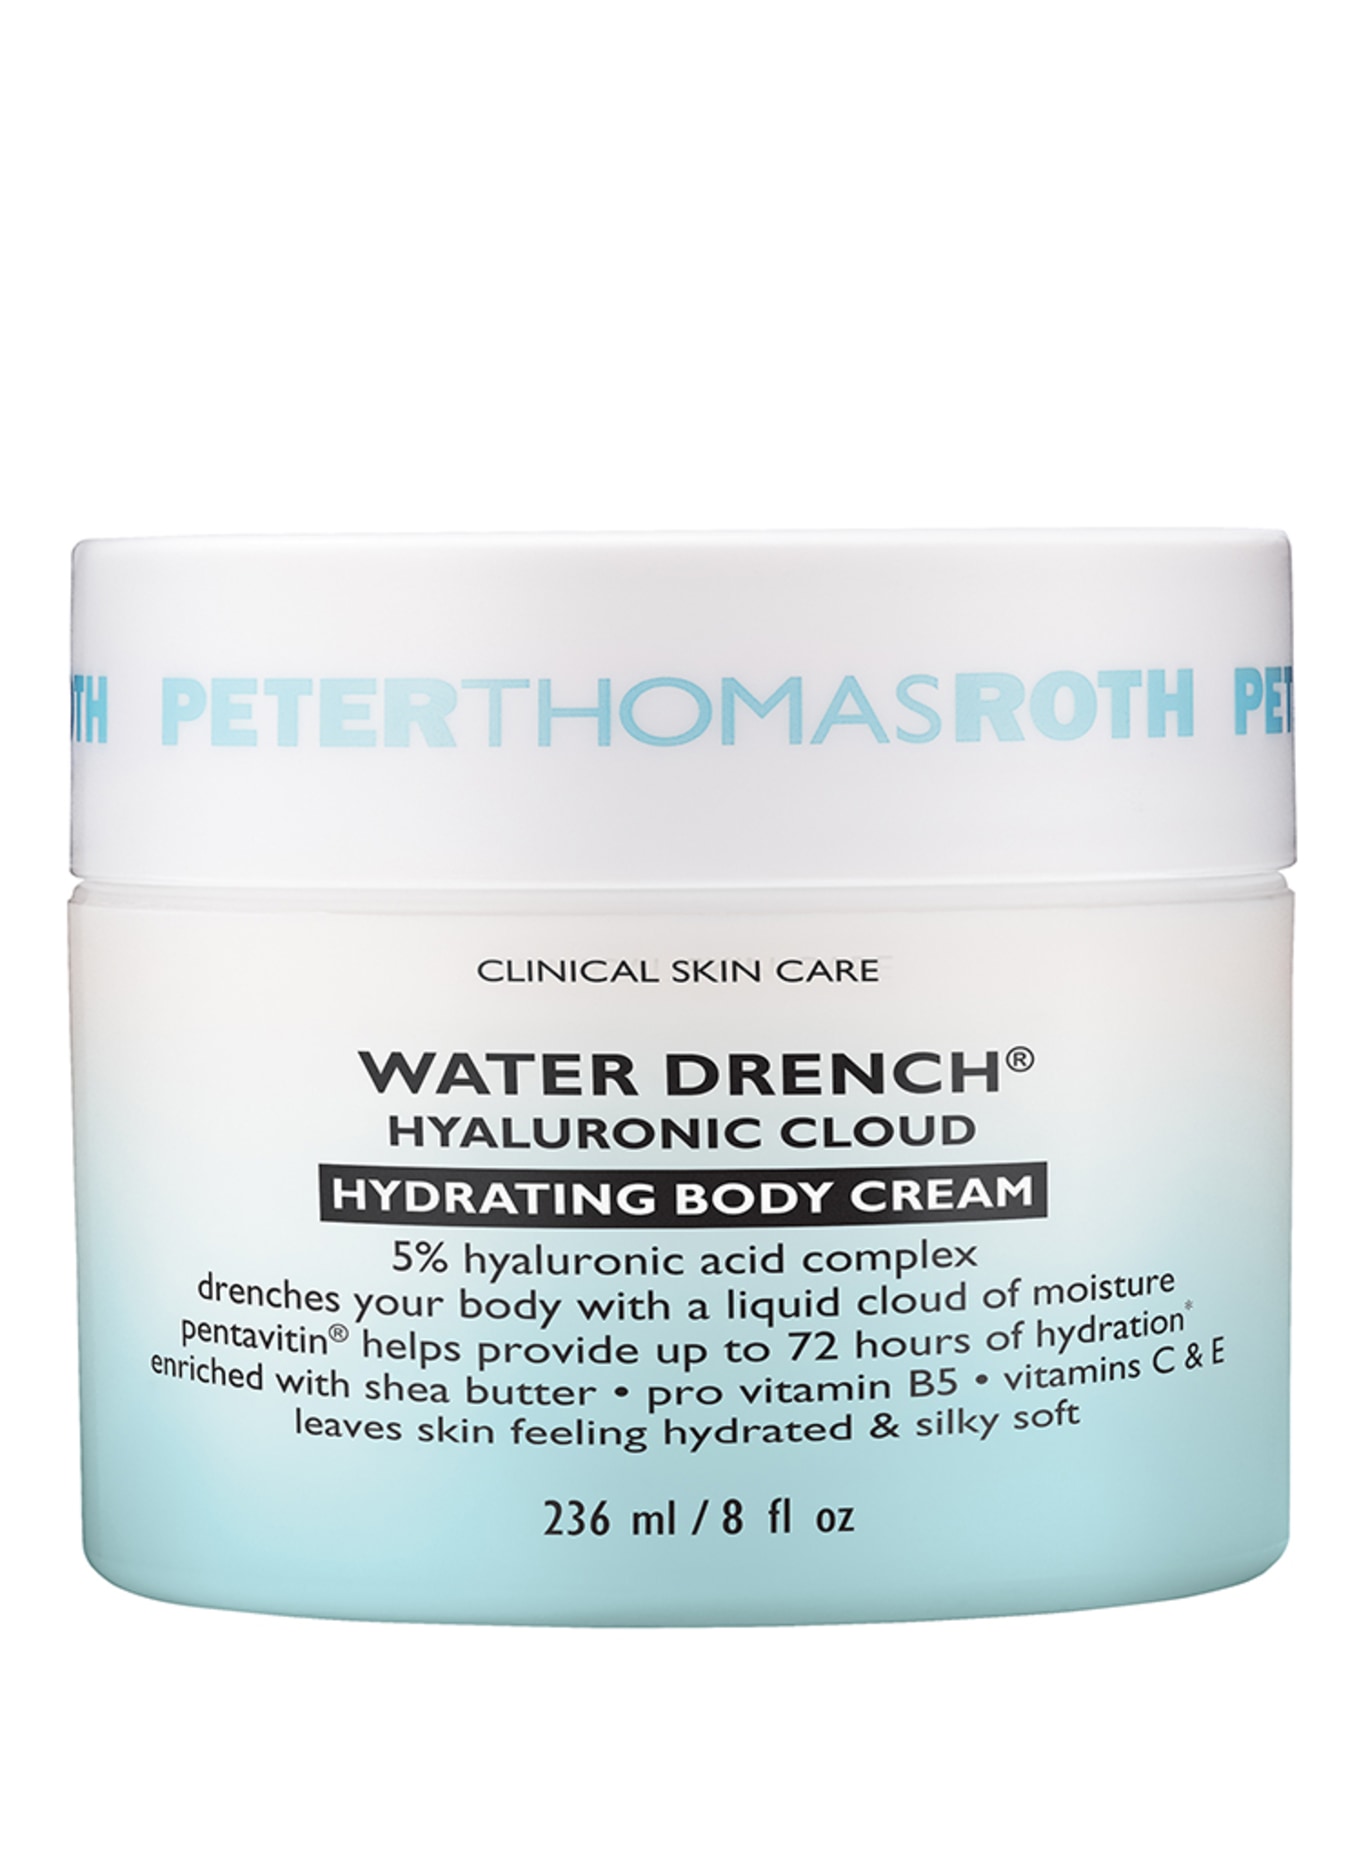 PETER THOMAS ROTH WATER DRENCH® HYALURONIC CLOUD (Obrázek 1)